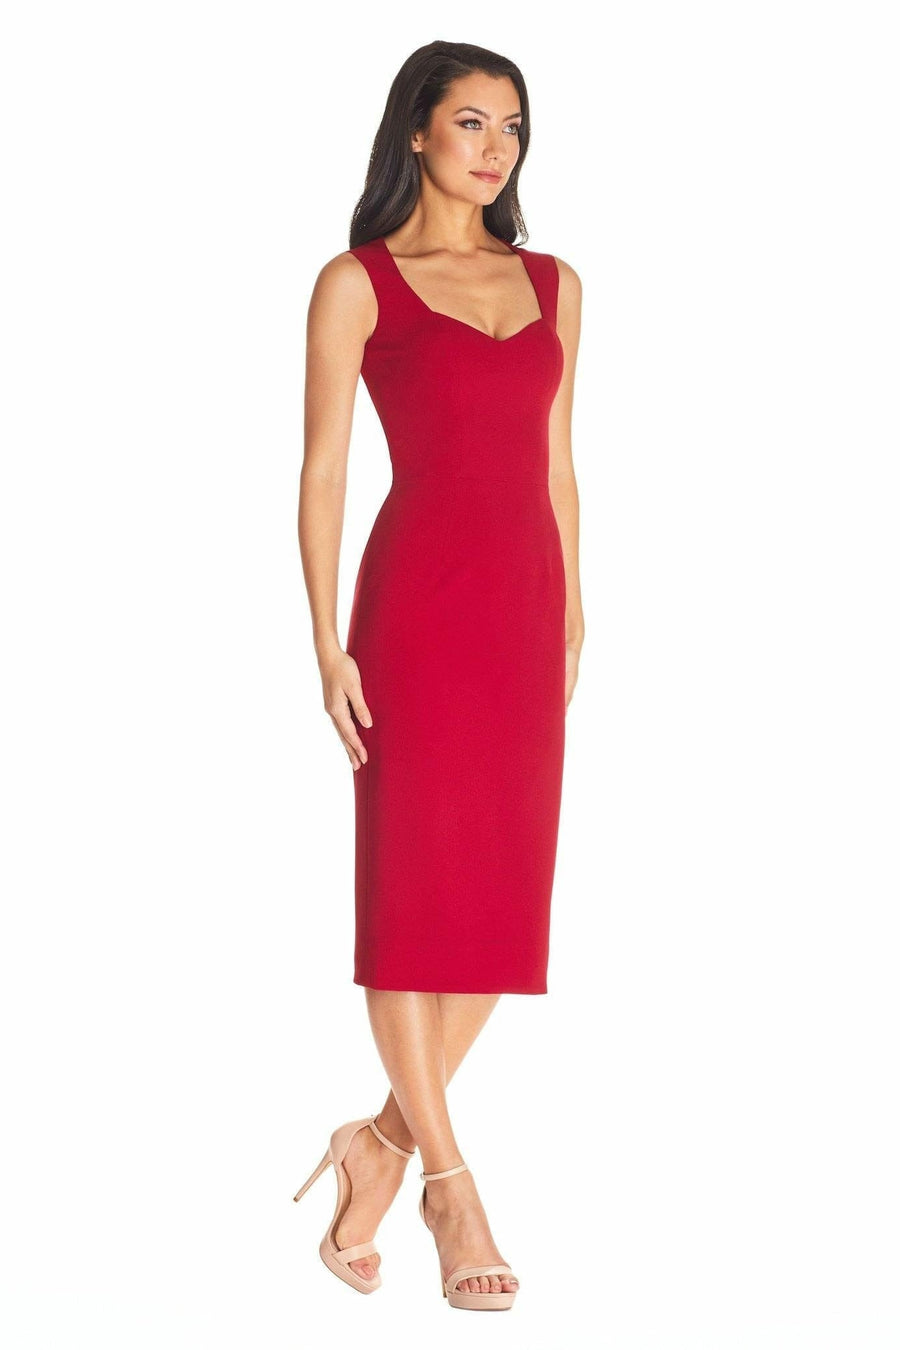 Elle Crystal Dress - Red - House of Tinks